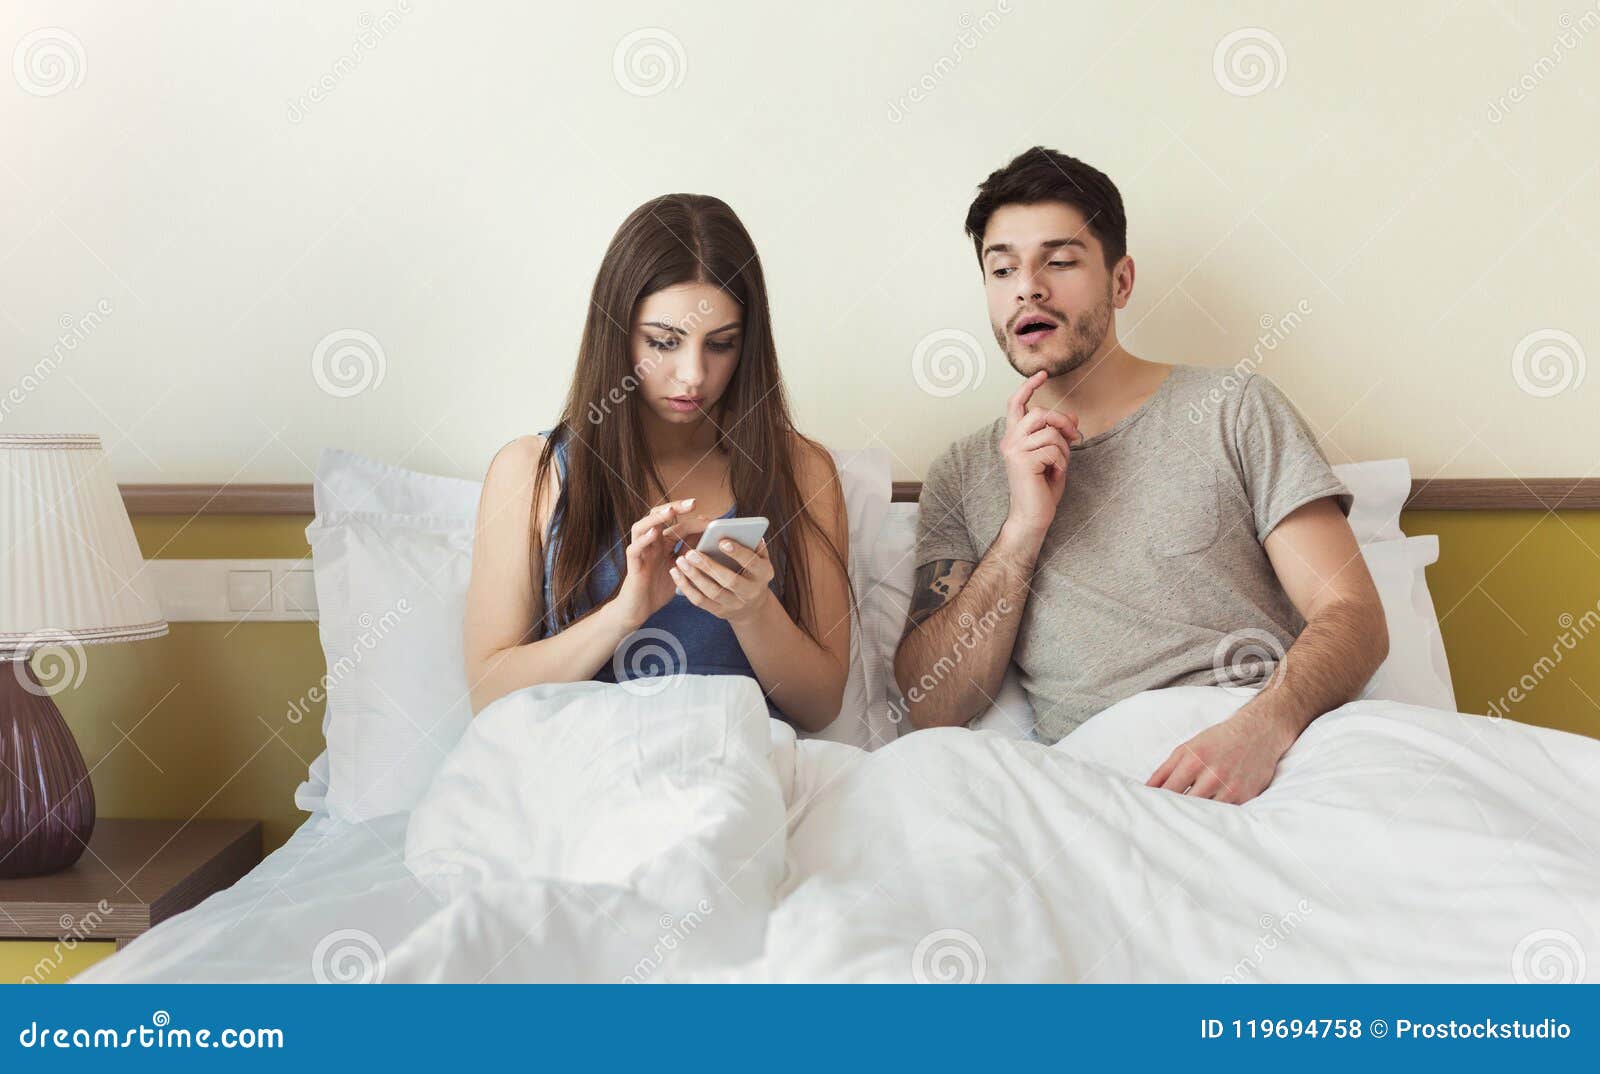 Jealous Husband Watching His Wife Using Mobile Phone Royalty-Fre image picture